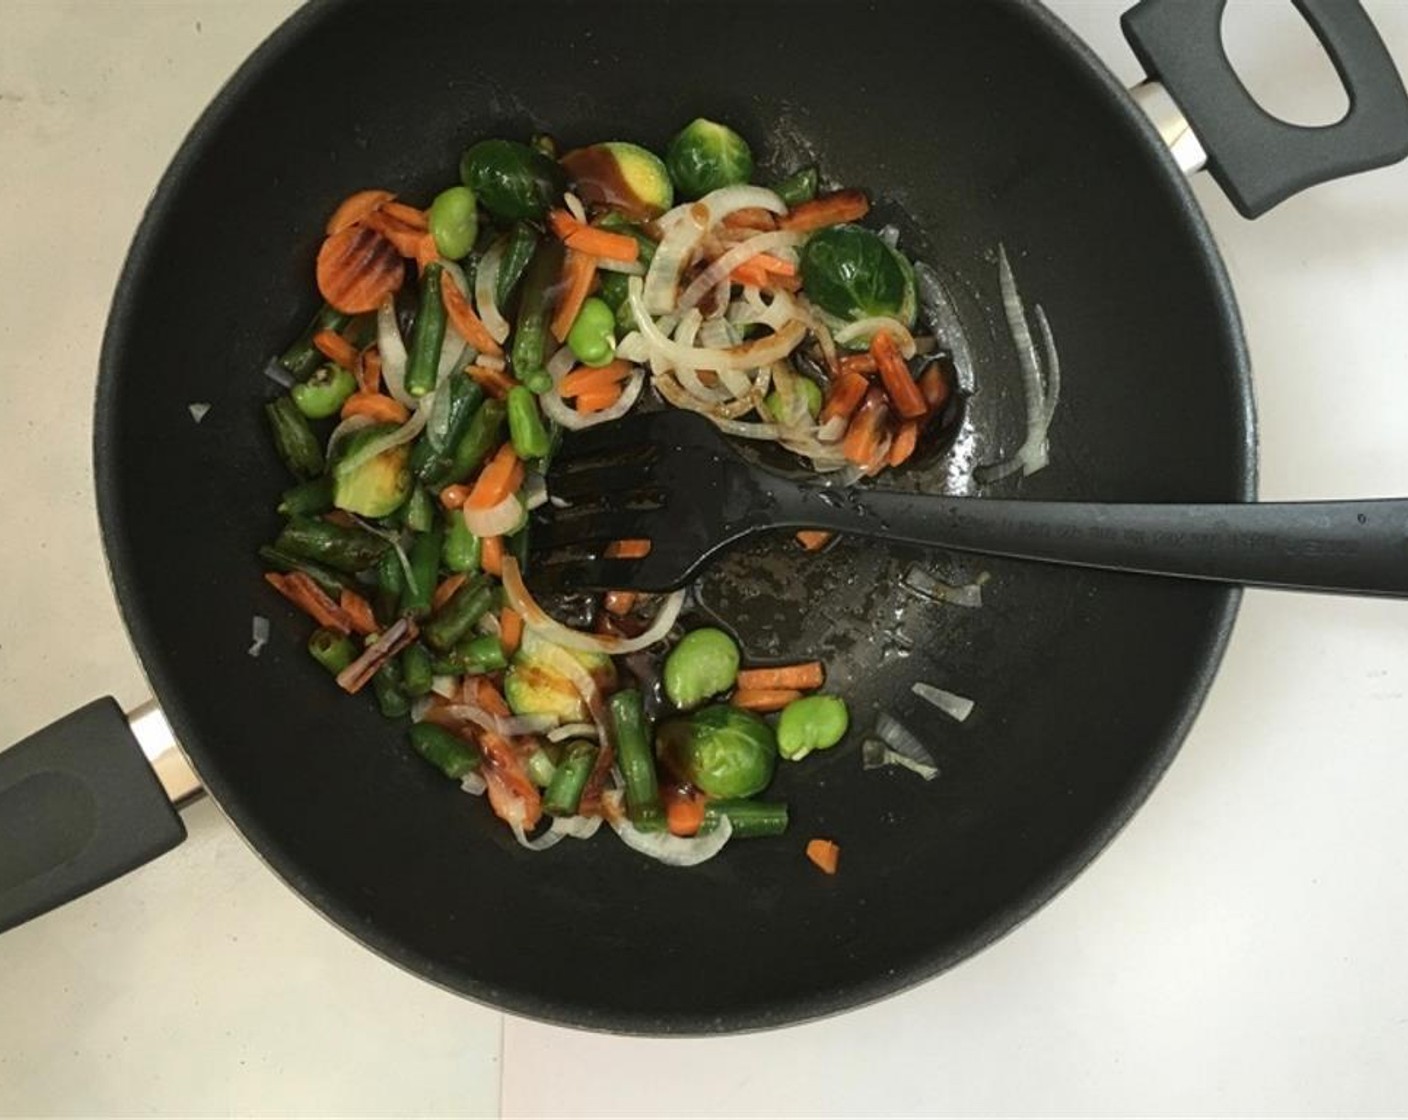 step 3 Then sprinkle the vegetables with the Oyster Sauce (2 Tbsp), Soy Sauce (1 Tbsp), Sesame Oil (1 tsp) and Fish Sauce (1 tsp). Add 3 tablespoons of water as well. Season with a pinch of Ground Black Pepper (to taste).